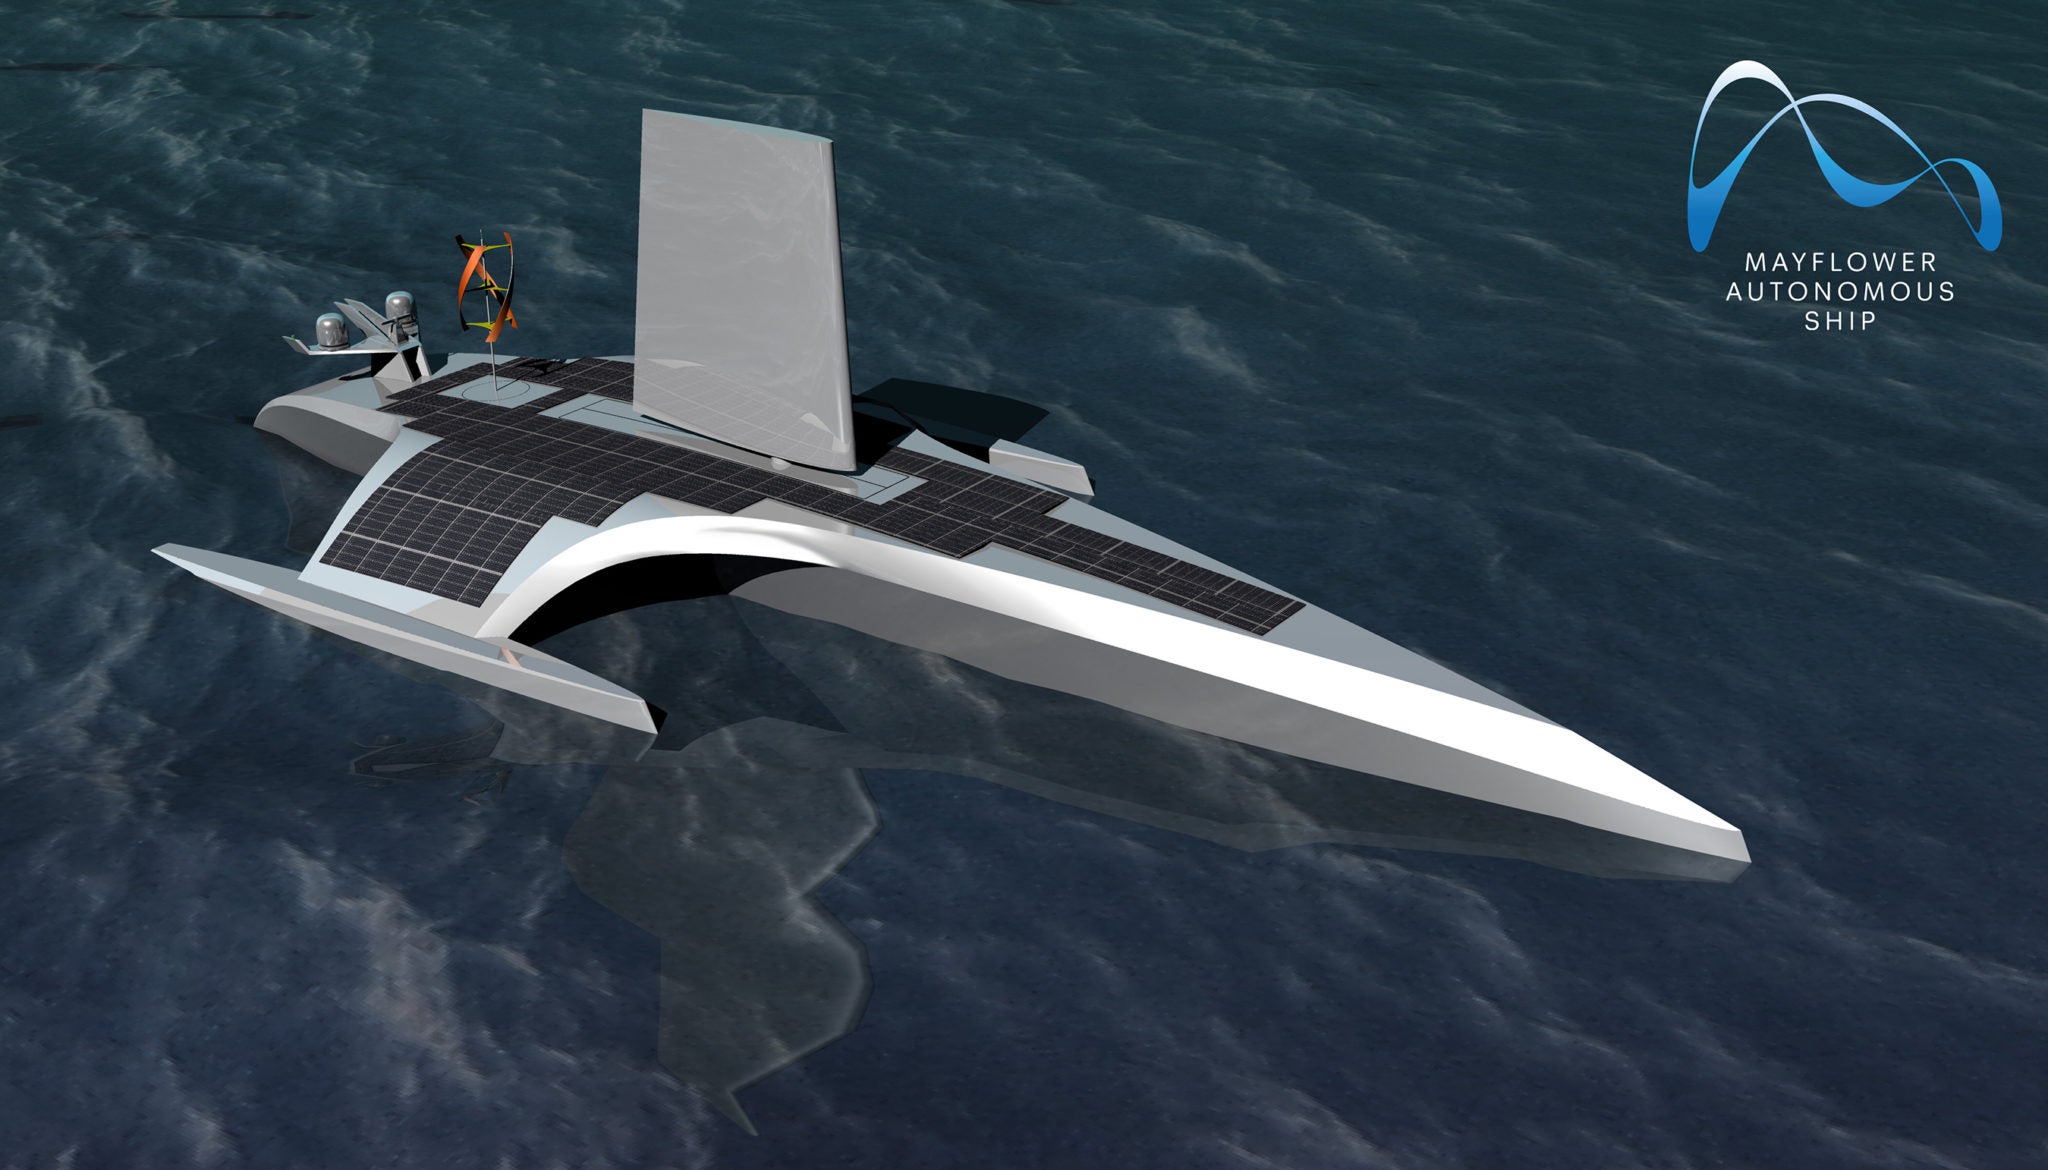 AI-Powered Research Vessel 'Mayflower Autonomous Ship' To Set Sail in 2020